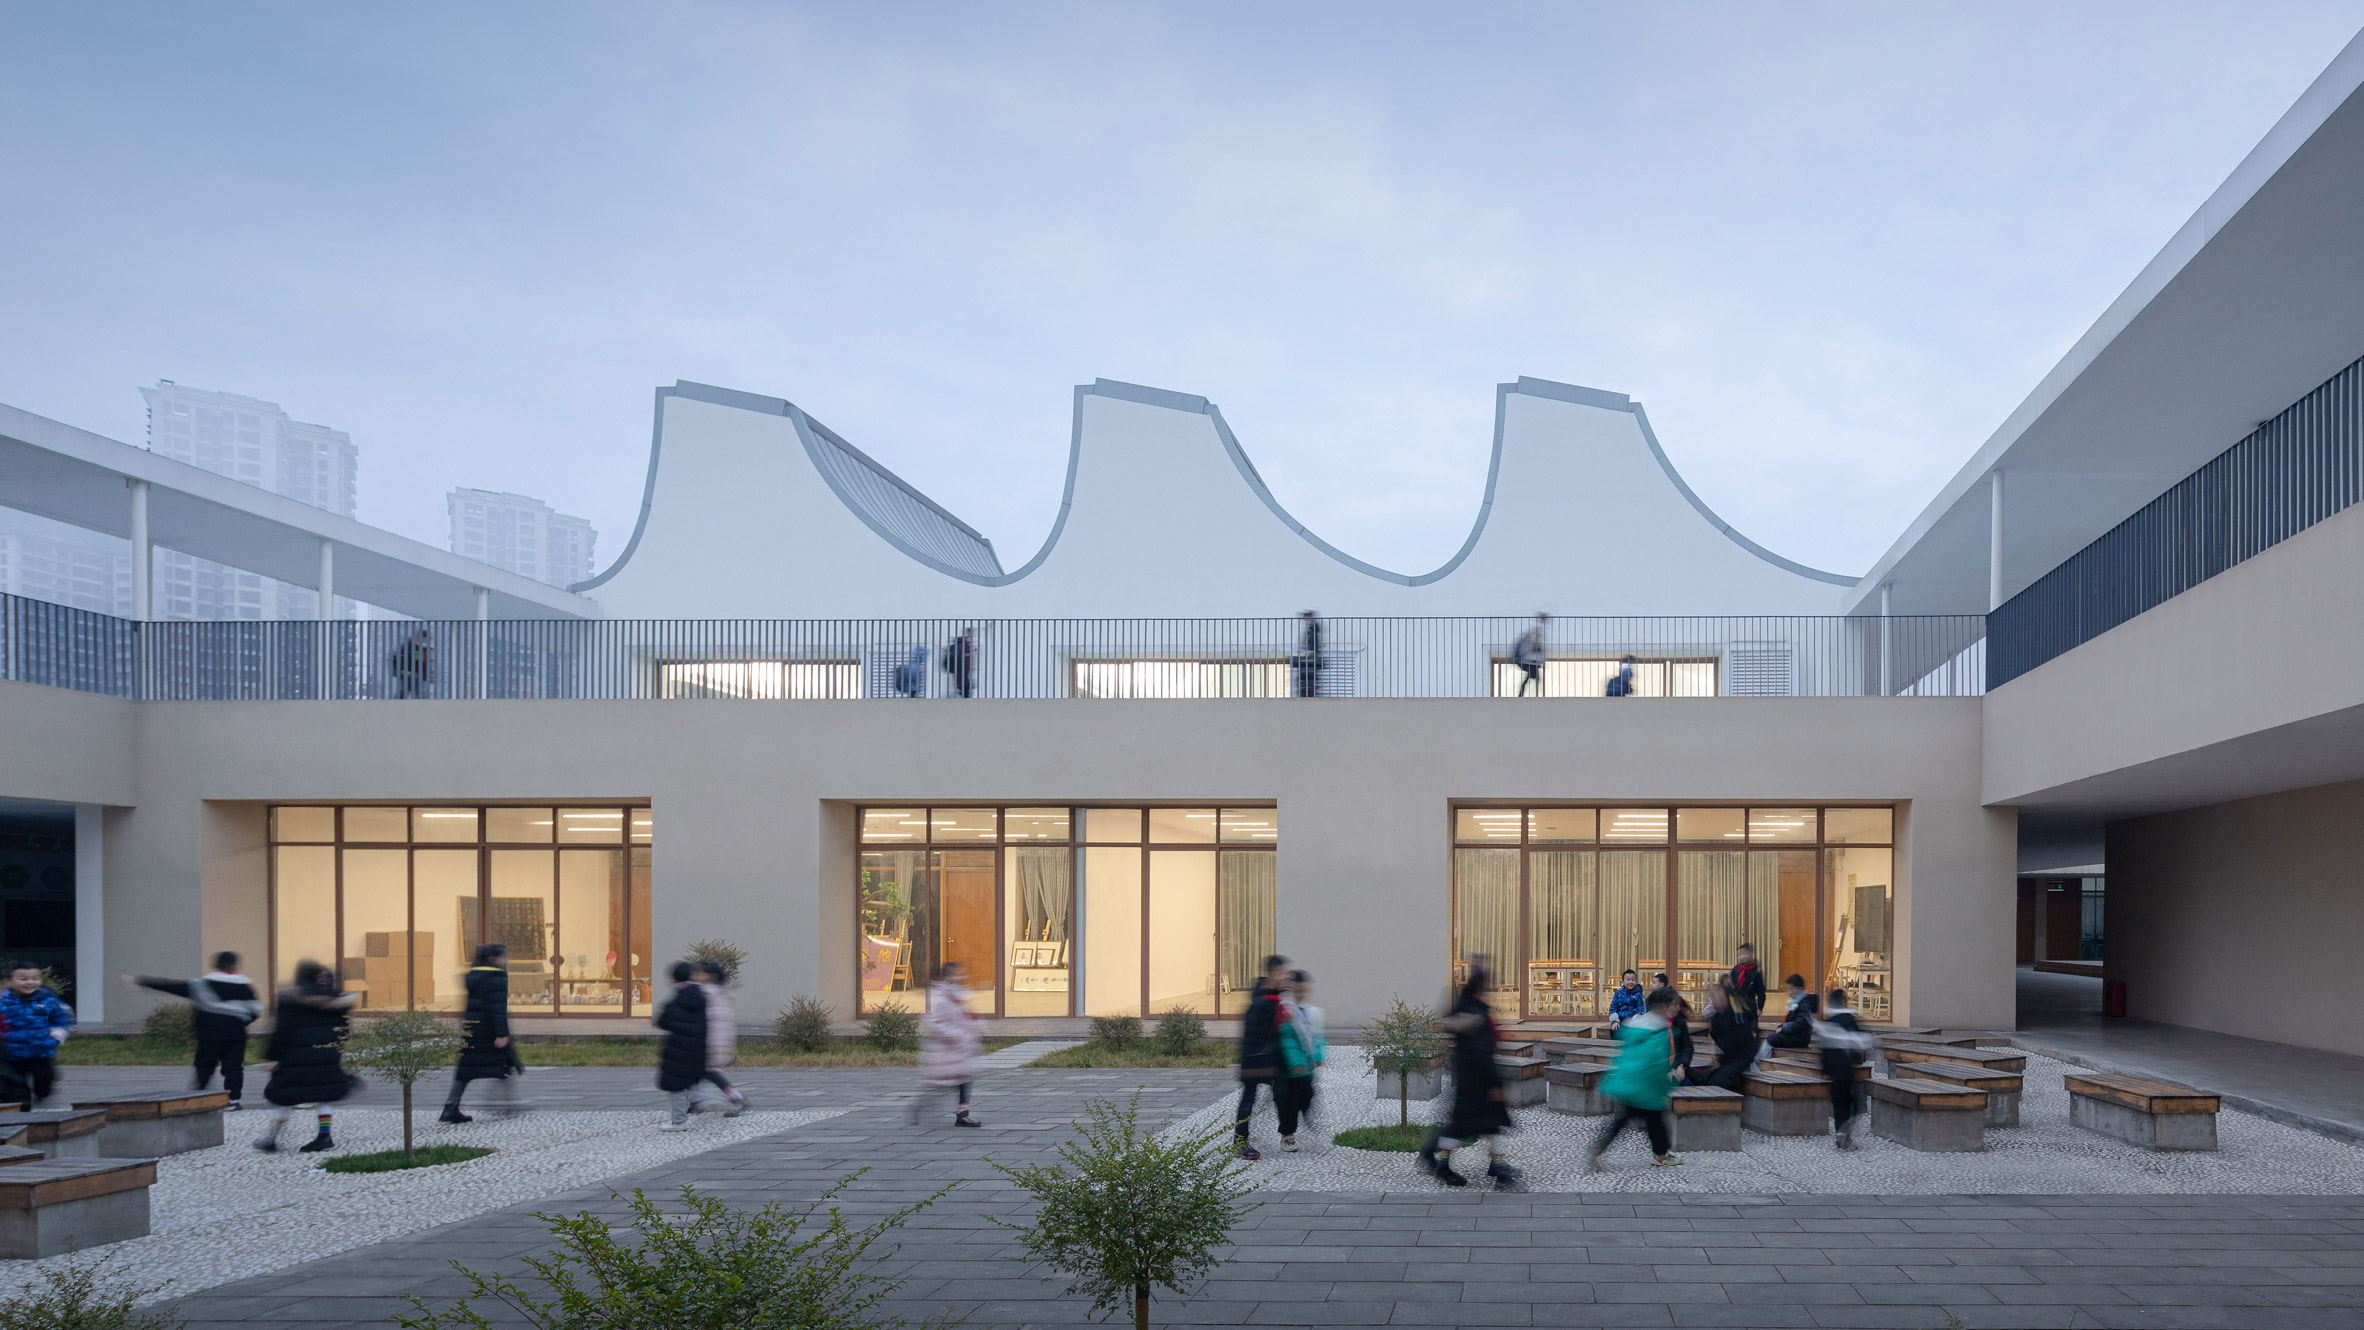 Curved roofs over classrooms around central courtyard in China elementary school by Trace Architecture Office